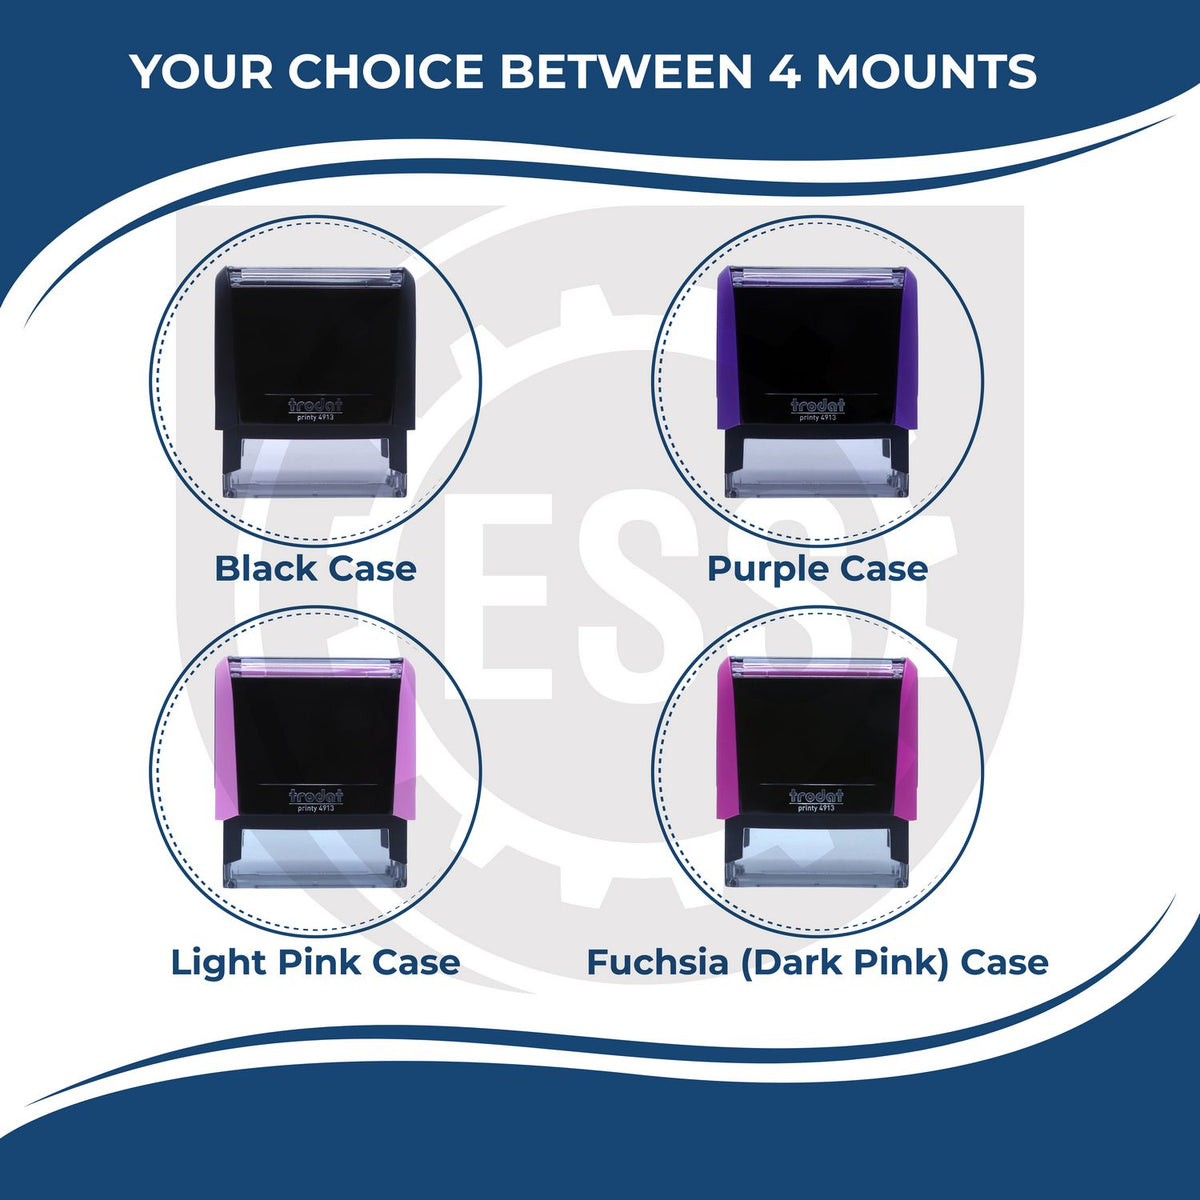 A picture of different colored mounts for the Self-Inking State Seal New Jersey Notary Stamp featurning a Red, Blue or Black Mount